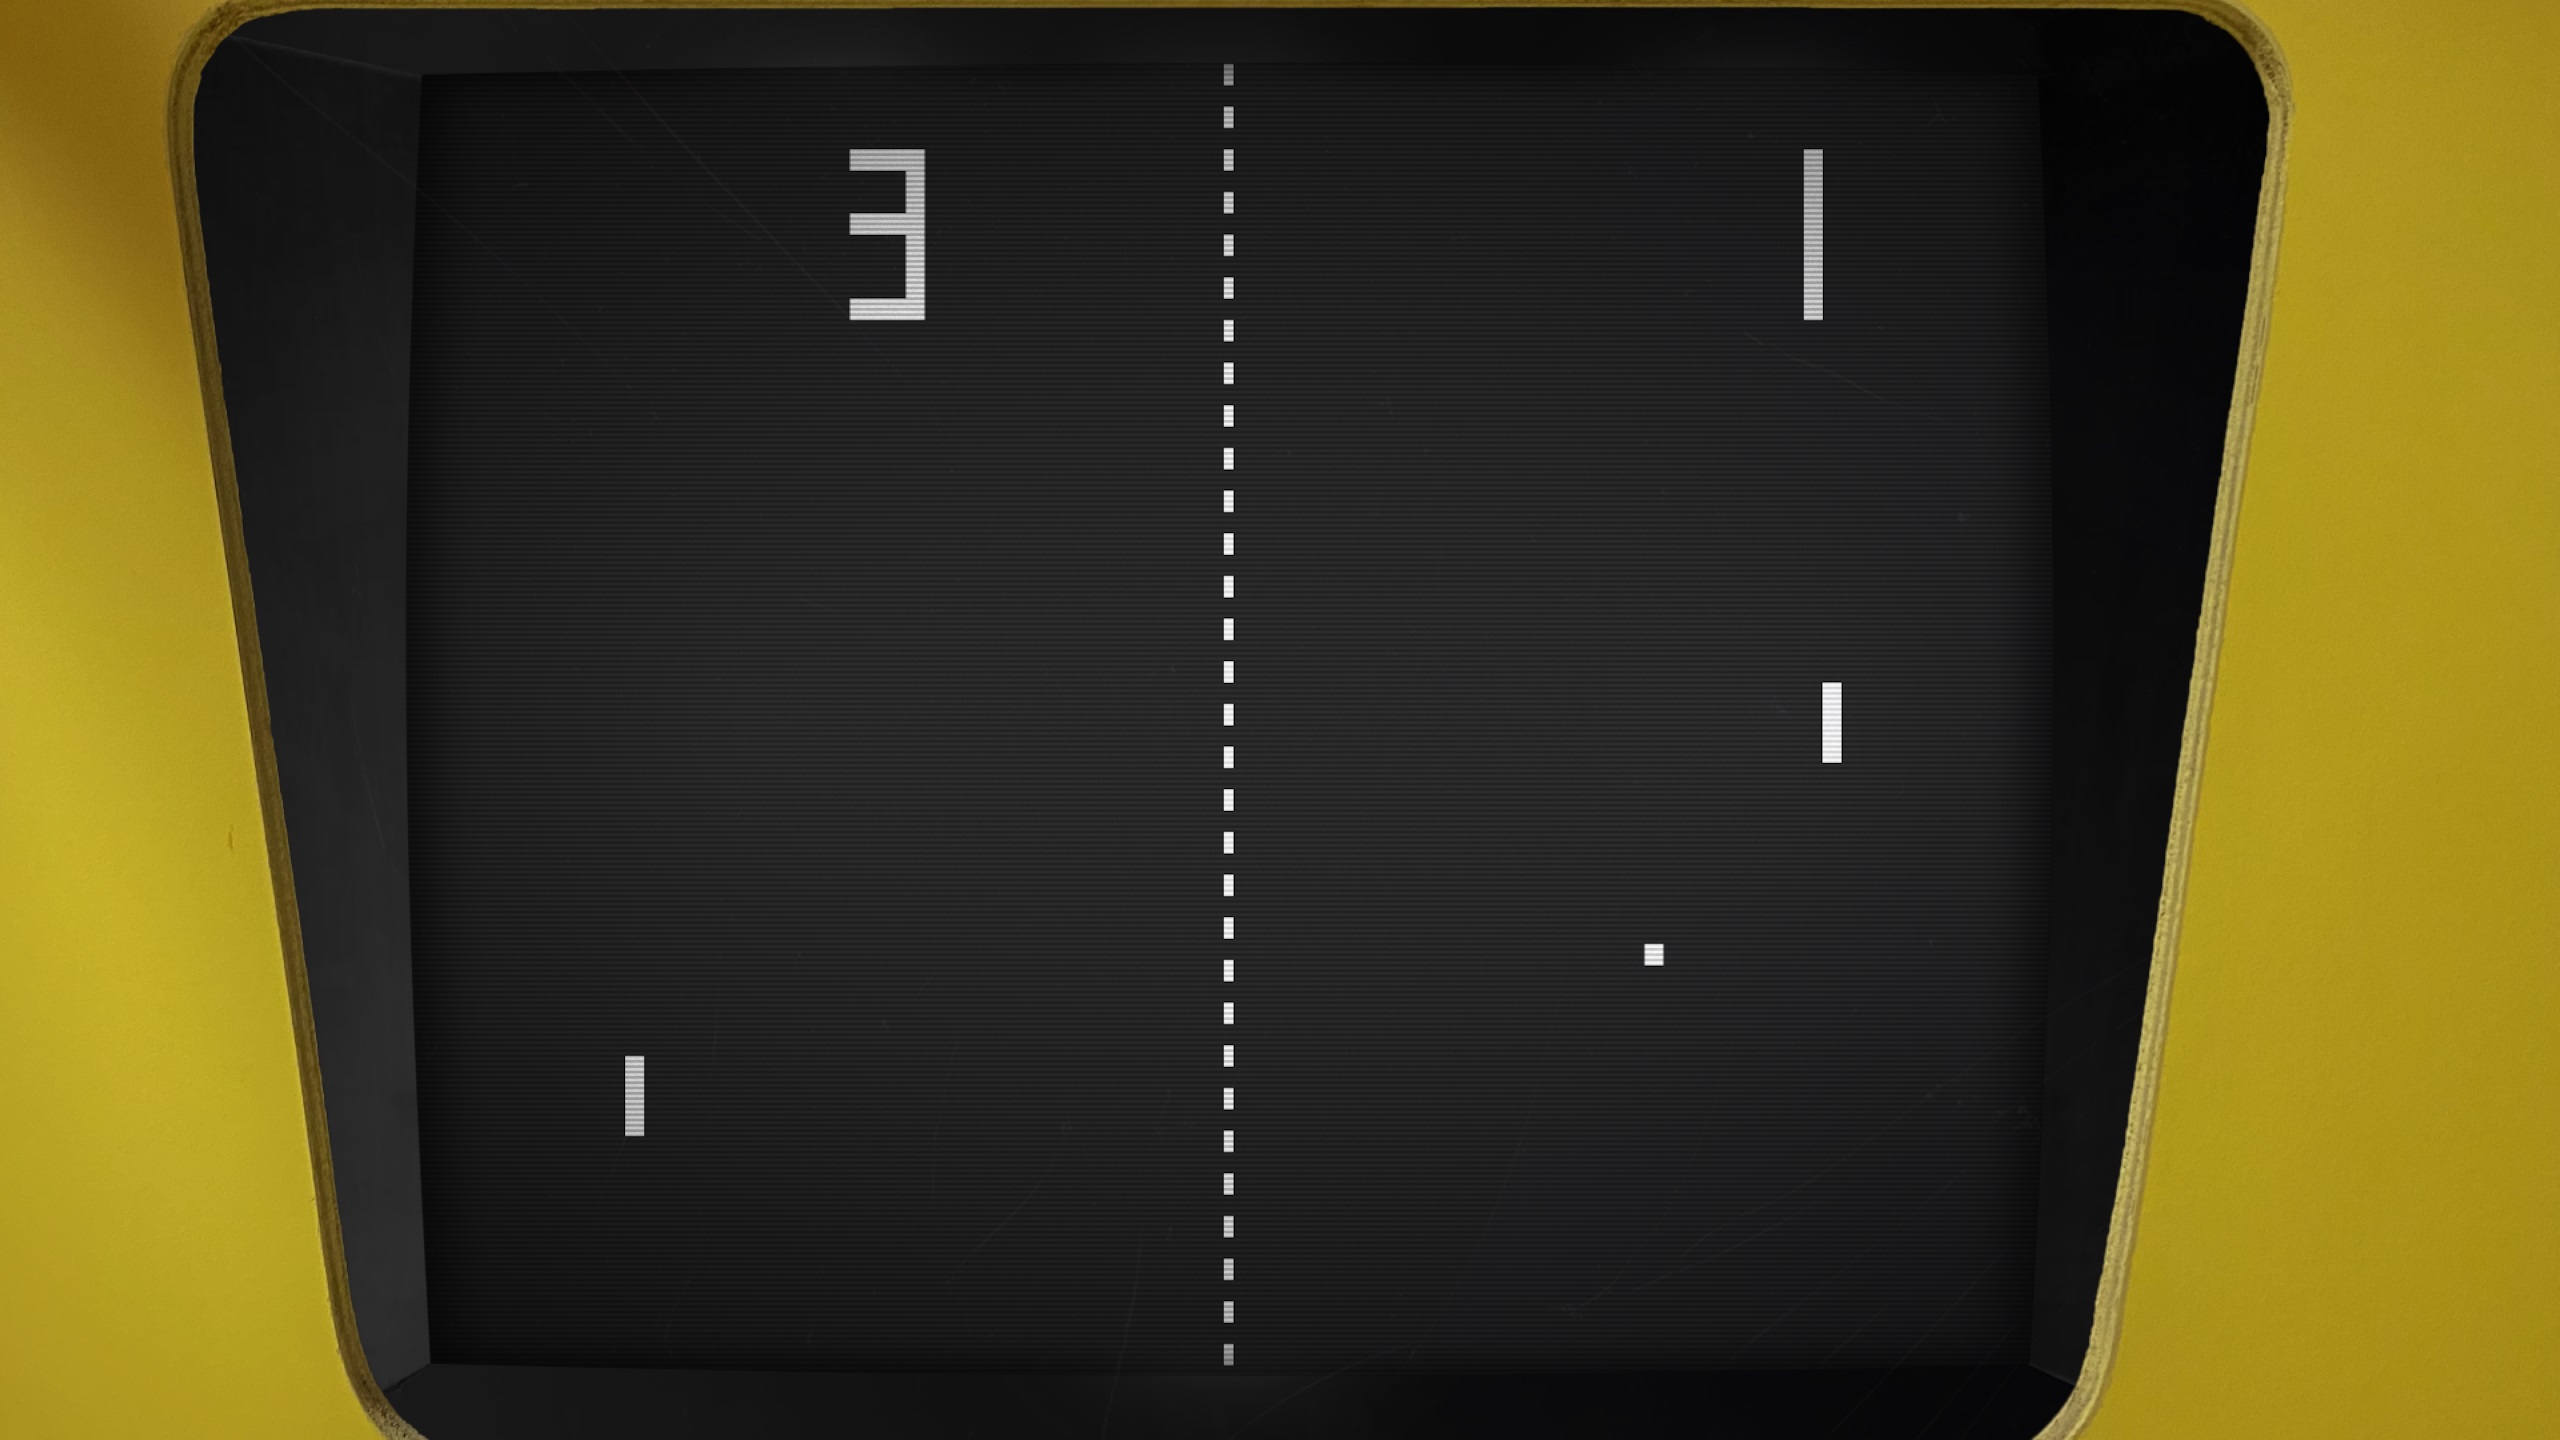 Screenshot of Pong, an arcade game included in Atari 50: The Anniversary Celebration